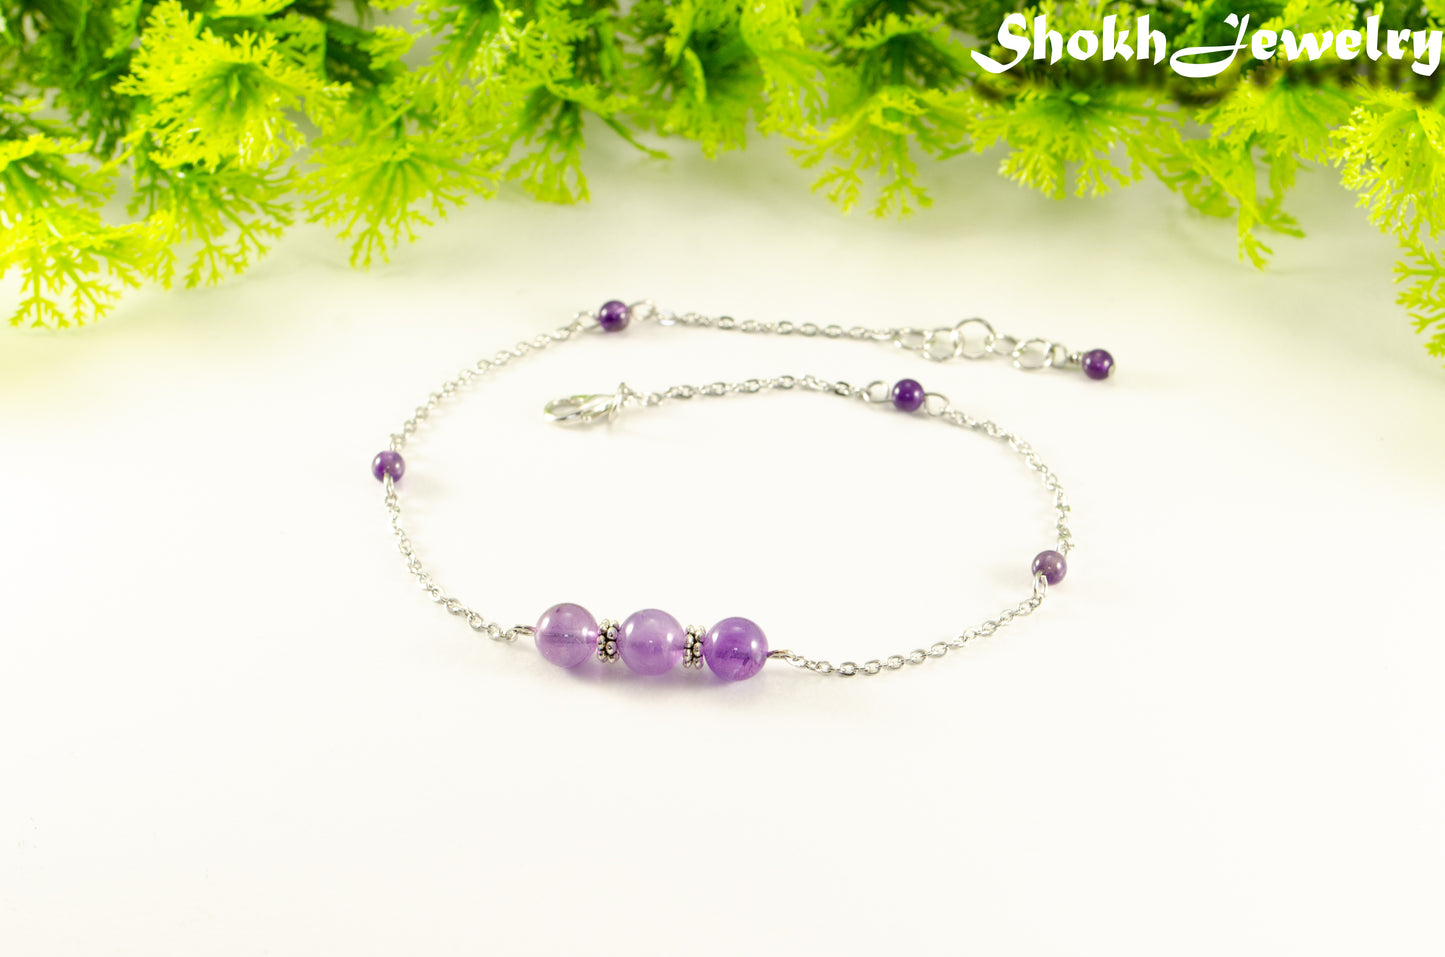 Natural Amethyst and Chain Choker Necklace for women.